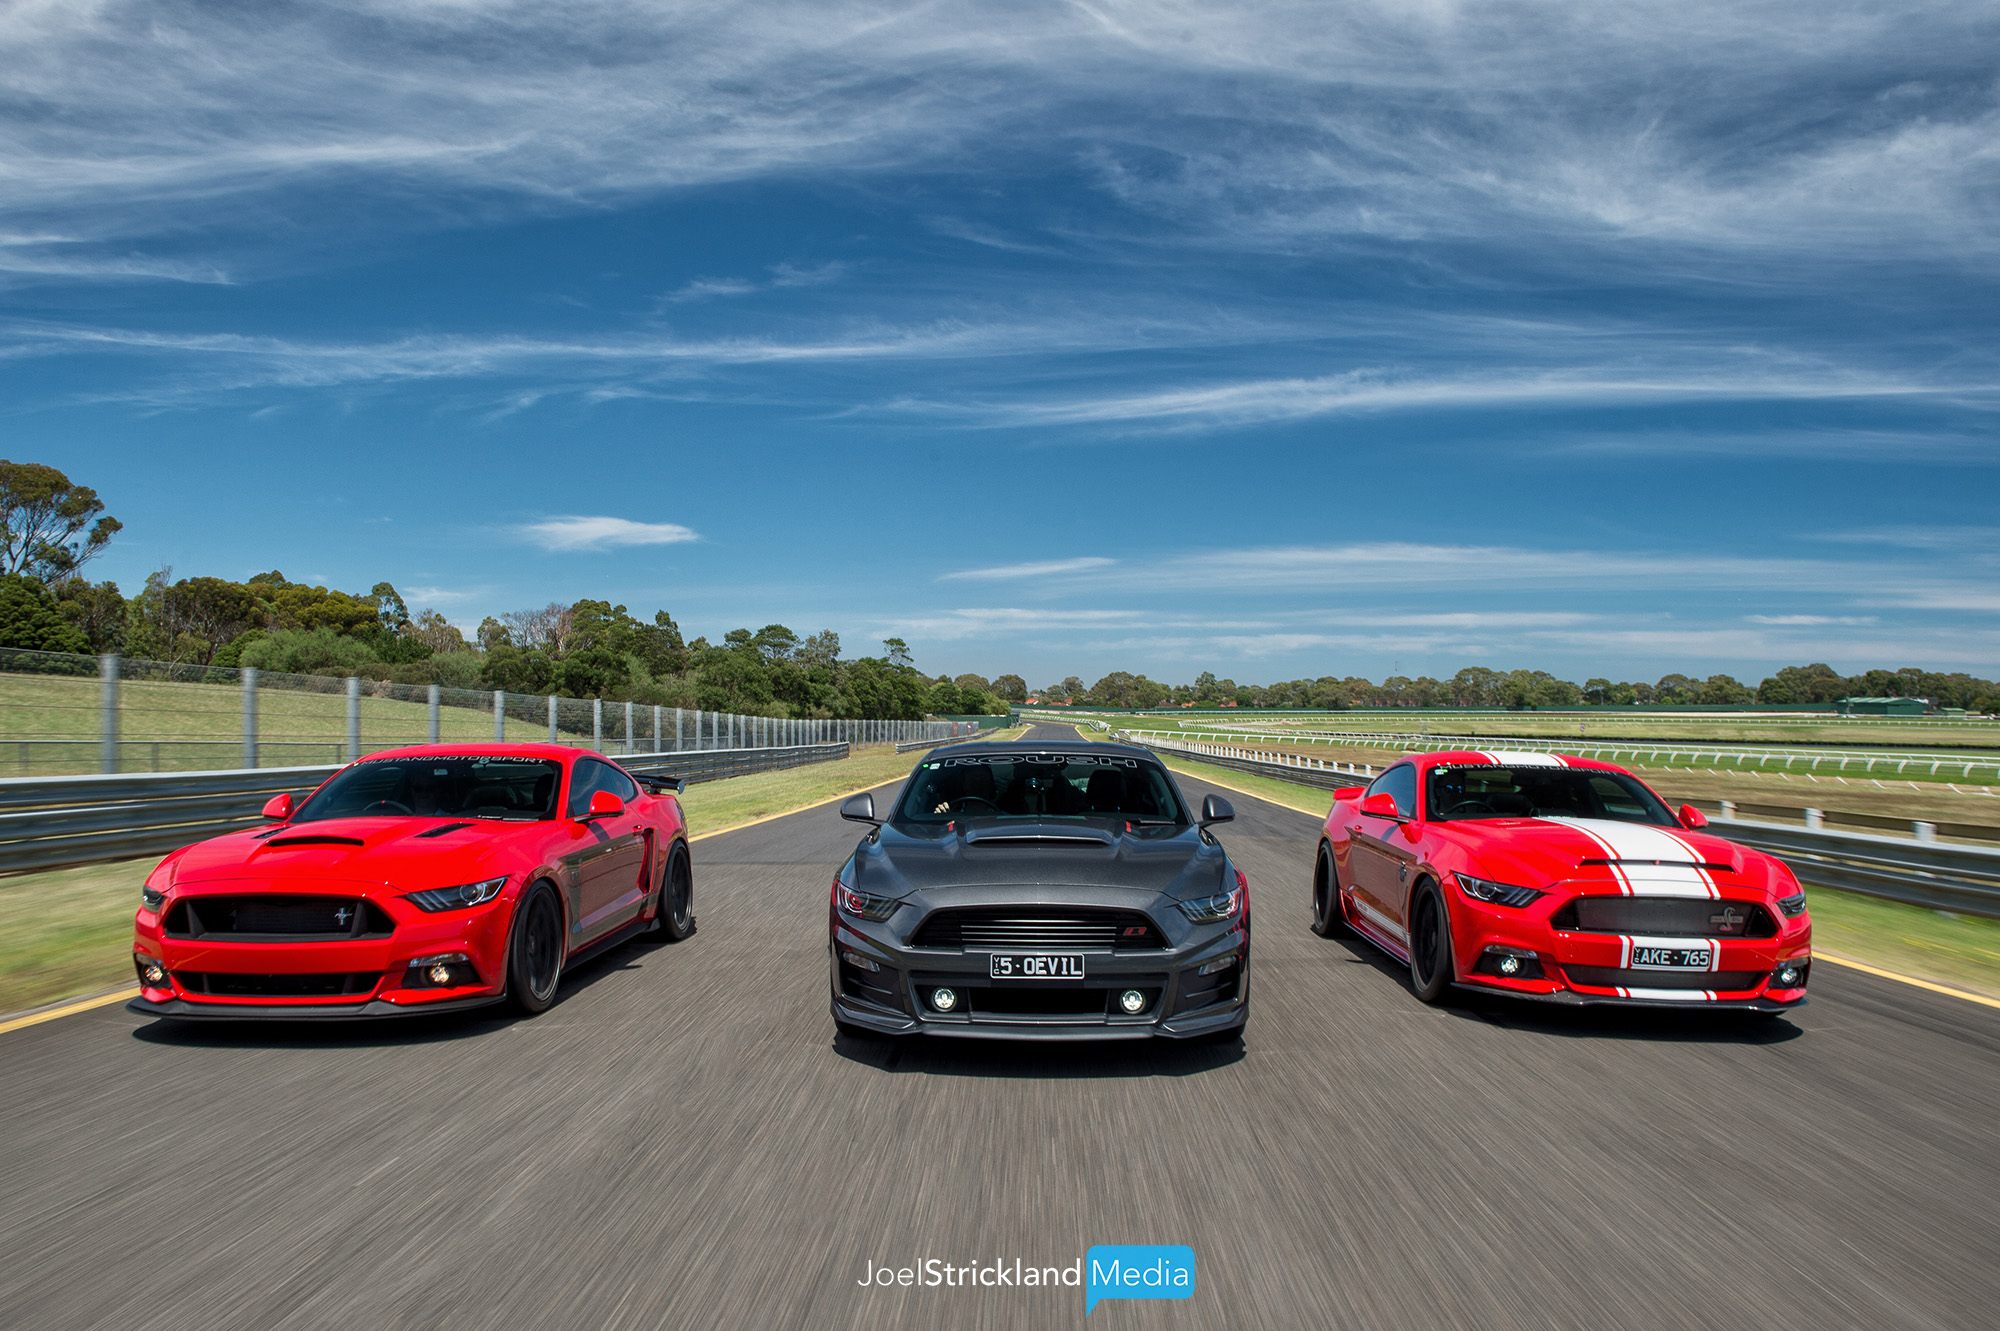 Favourites images of 2017 – Behind the lens – Mustang Trio on Track